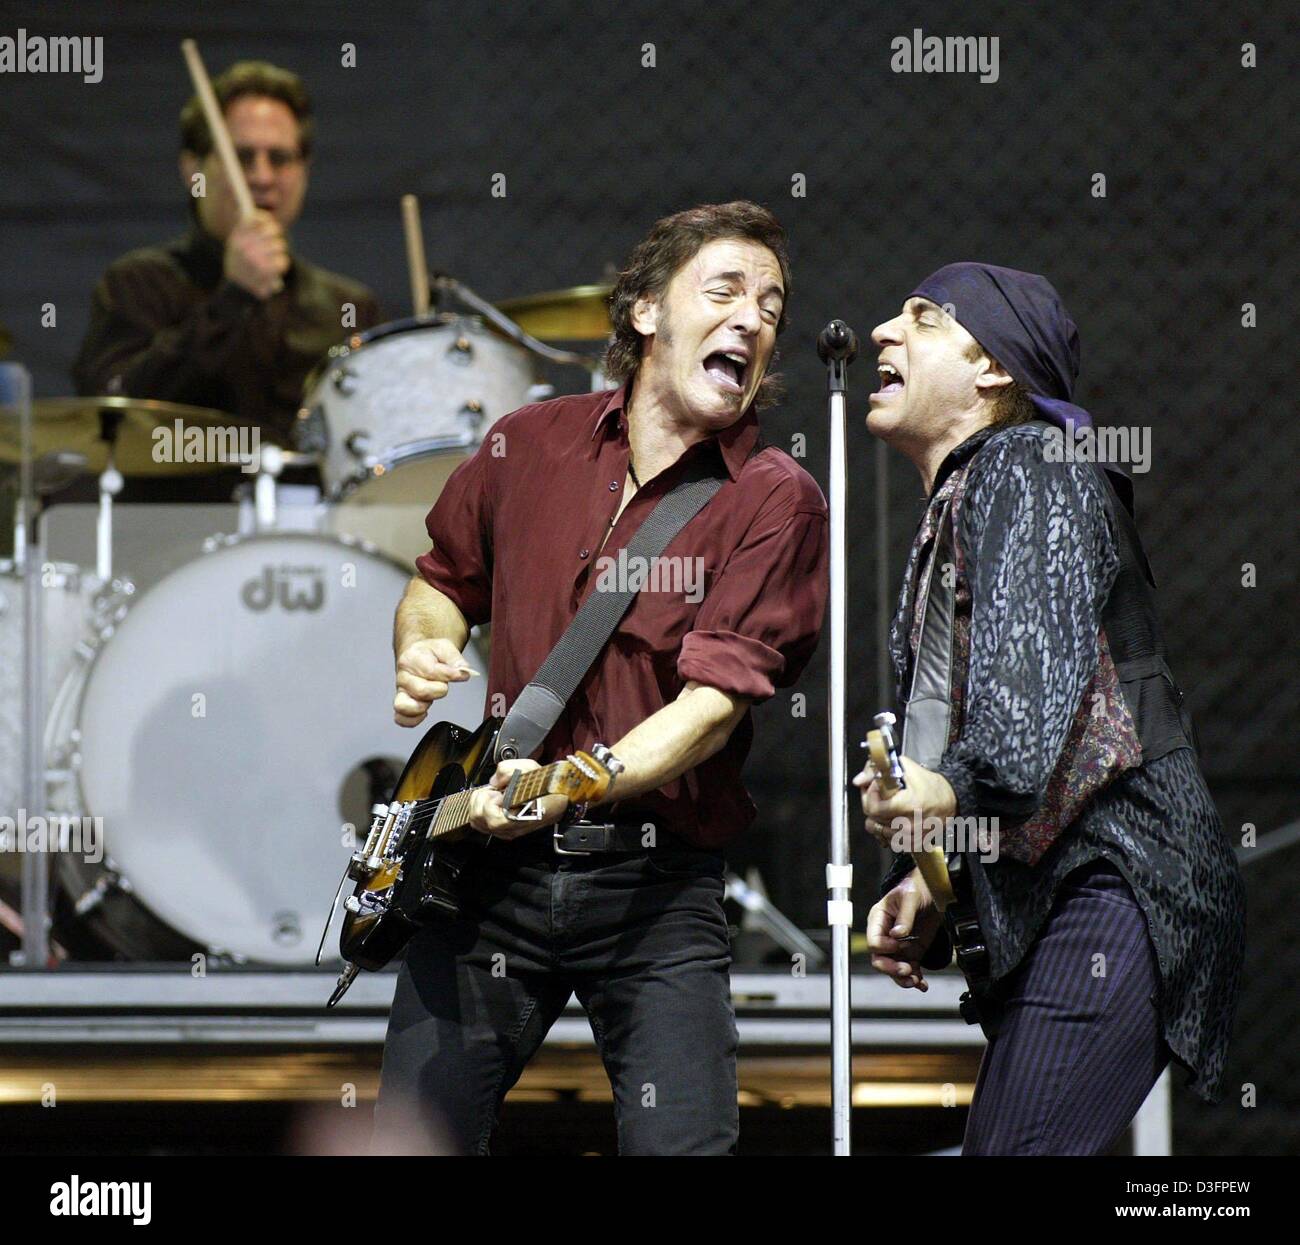 (dpa) - US rock star Bruce Springsteen sings together with Steven van Zandt (R) of the E-Street Band during a concert in Ludwigshafen, Germany, 10 May 2003. 35,000 fans attended the concert of 'The Boss', who played many of his hits, including songs from his latest album 'The Rising', which deals with the terror attacks of 11 September. 'The Rising' is Springsteen's first album of  Stock Photo